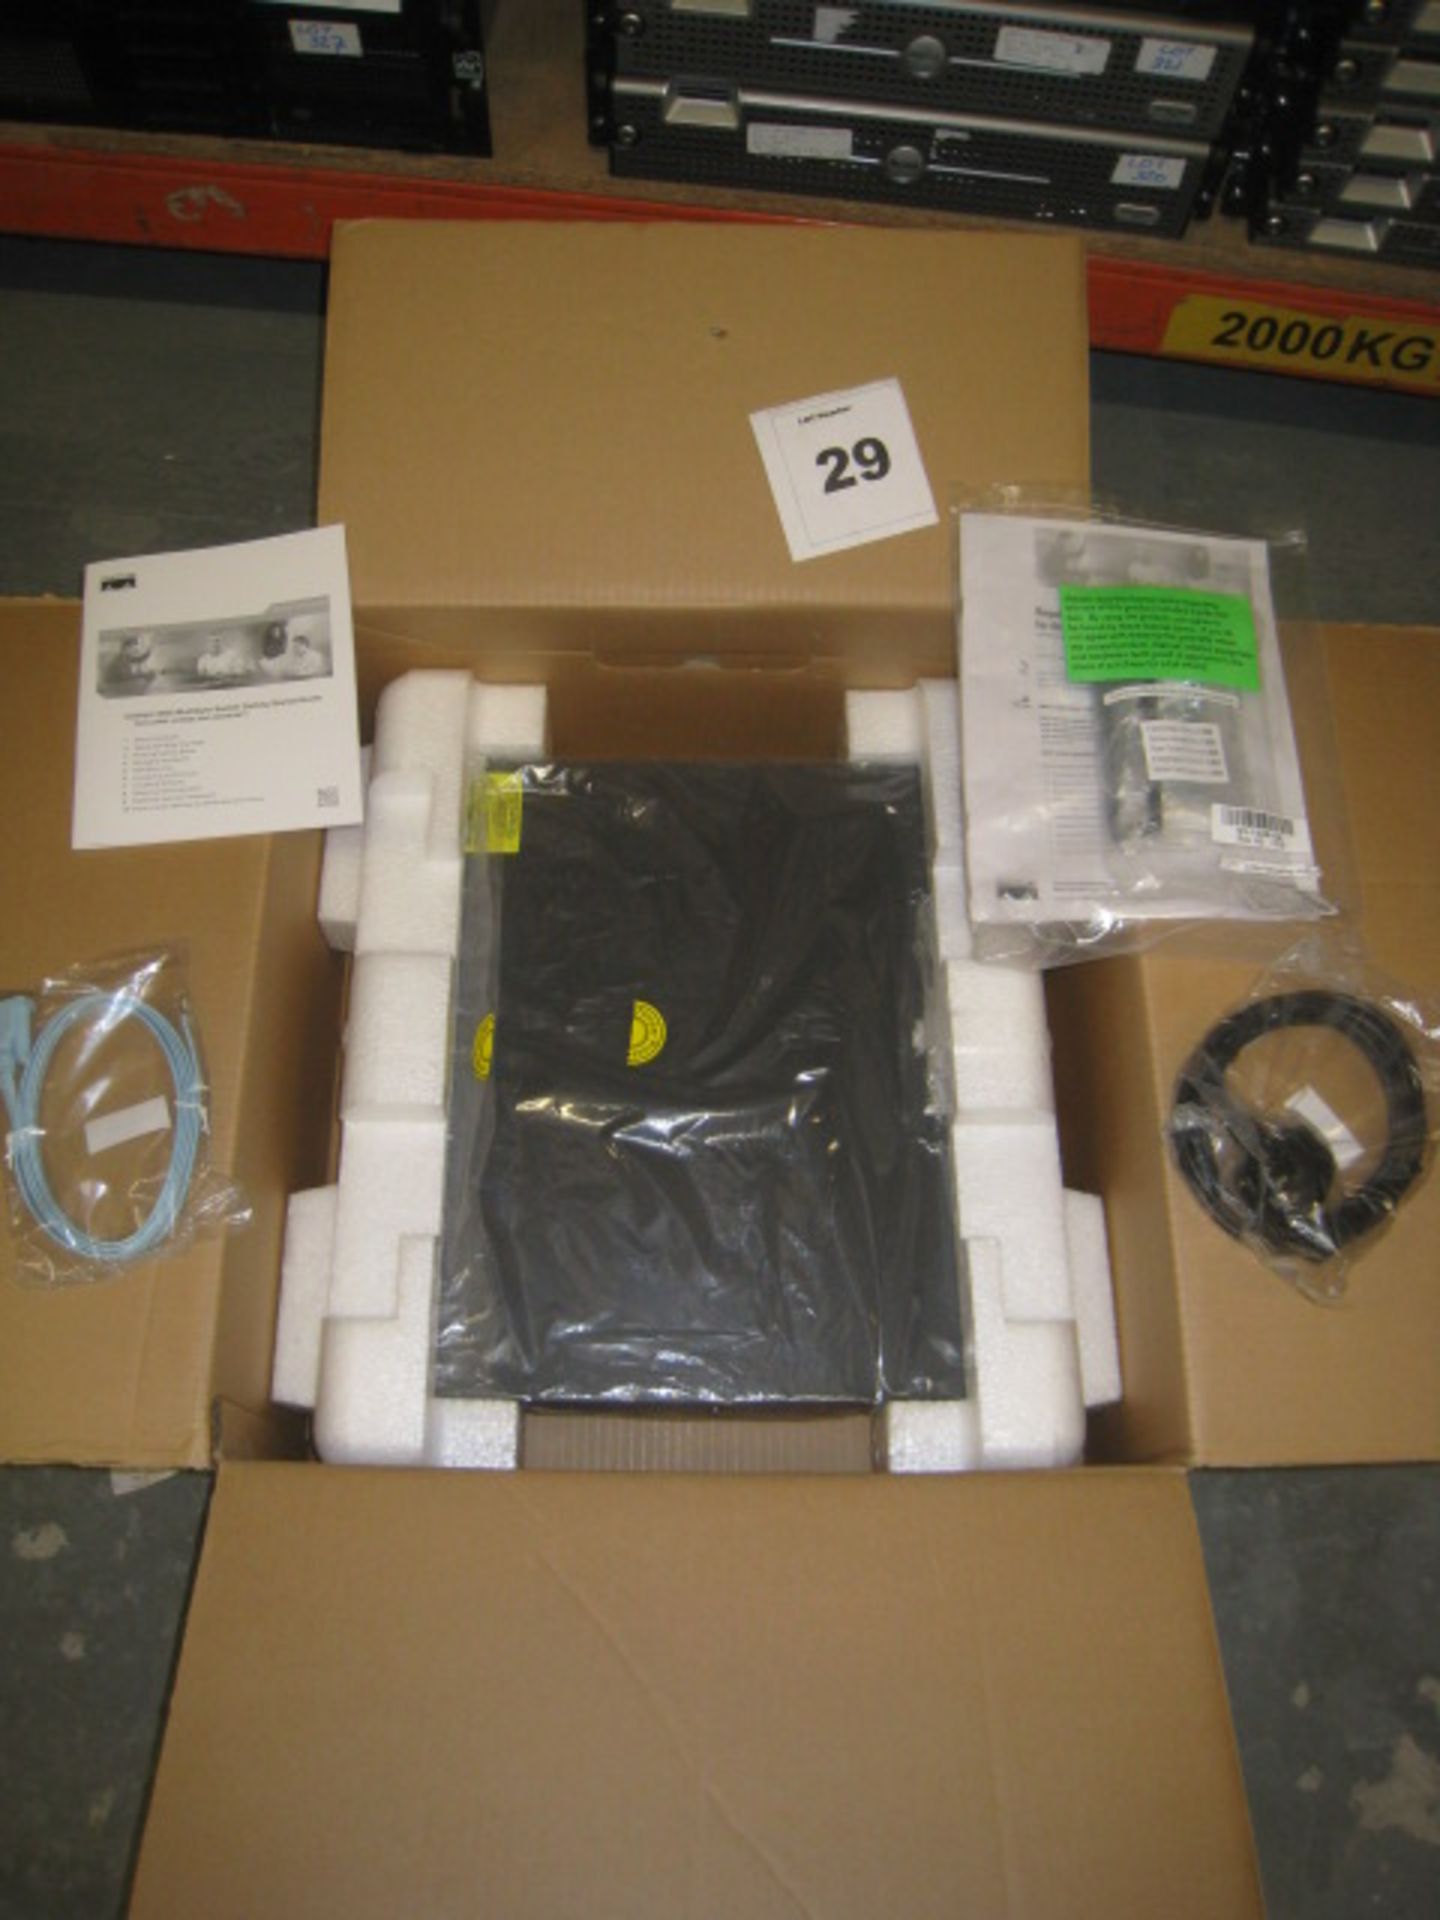 BOXED CISCO CATALYST 3550 48 PORT SWITCH. MODEL WS-C3550-48-EMI. WITH USER MANUAL & CABLES - Image 2 of 2